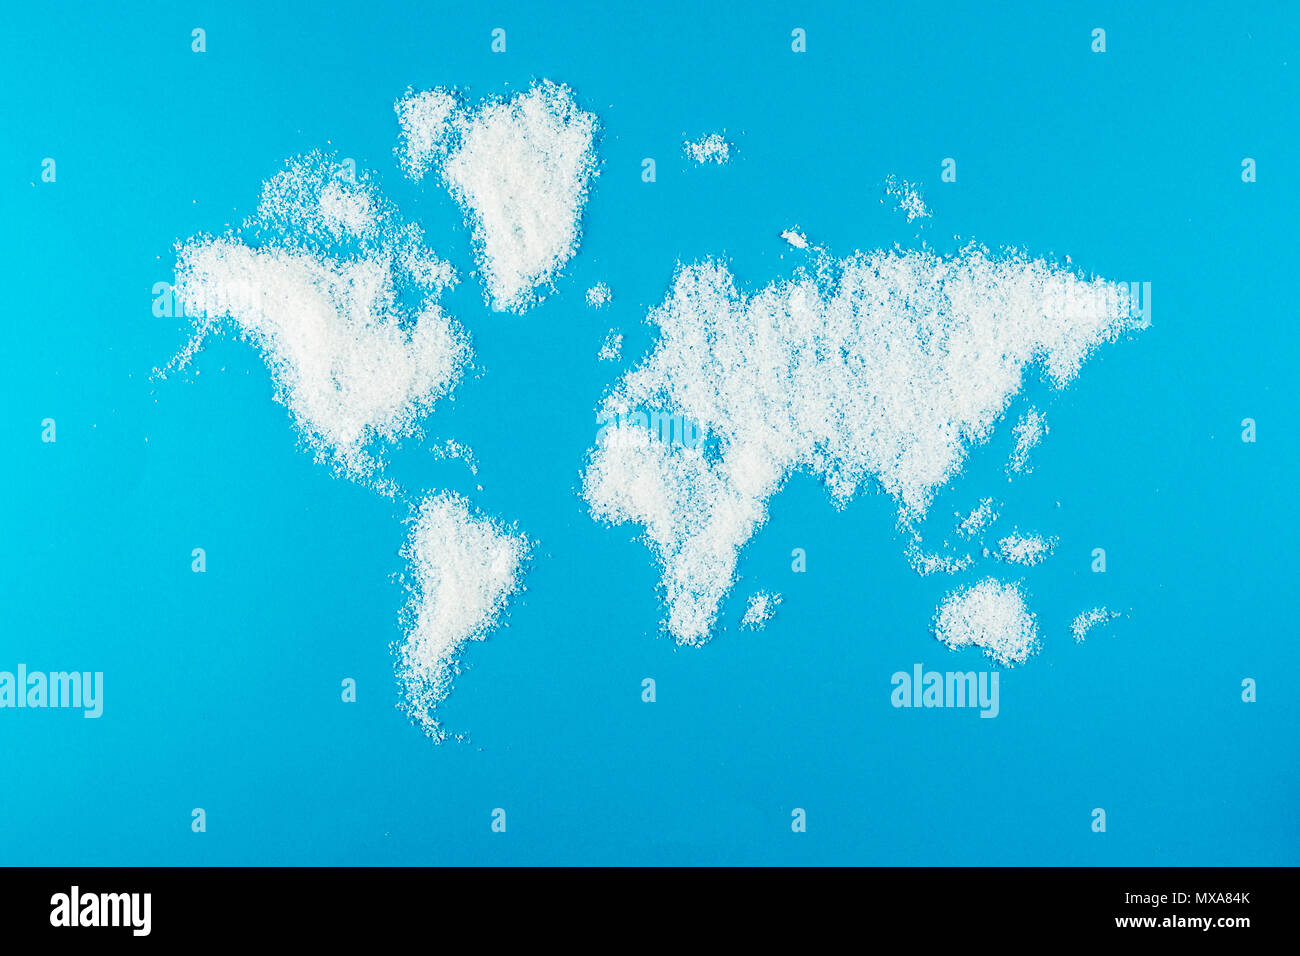 map of the world made of snow on blue backgound Stock Photo